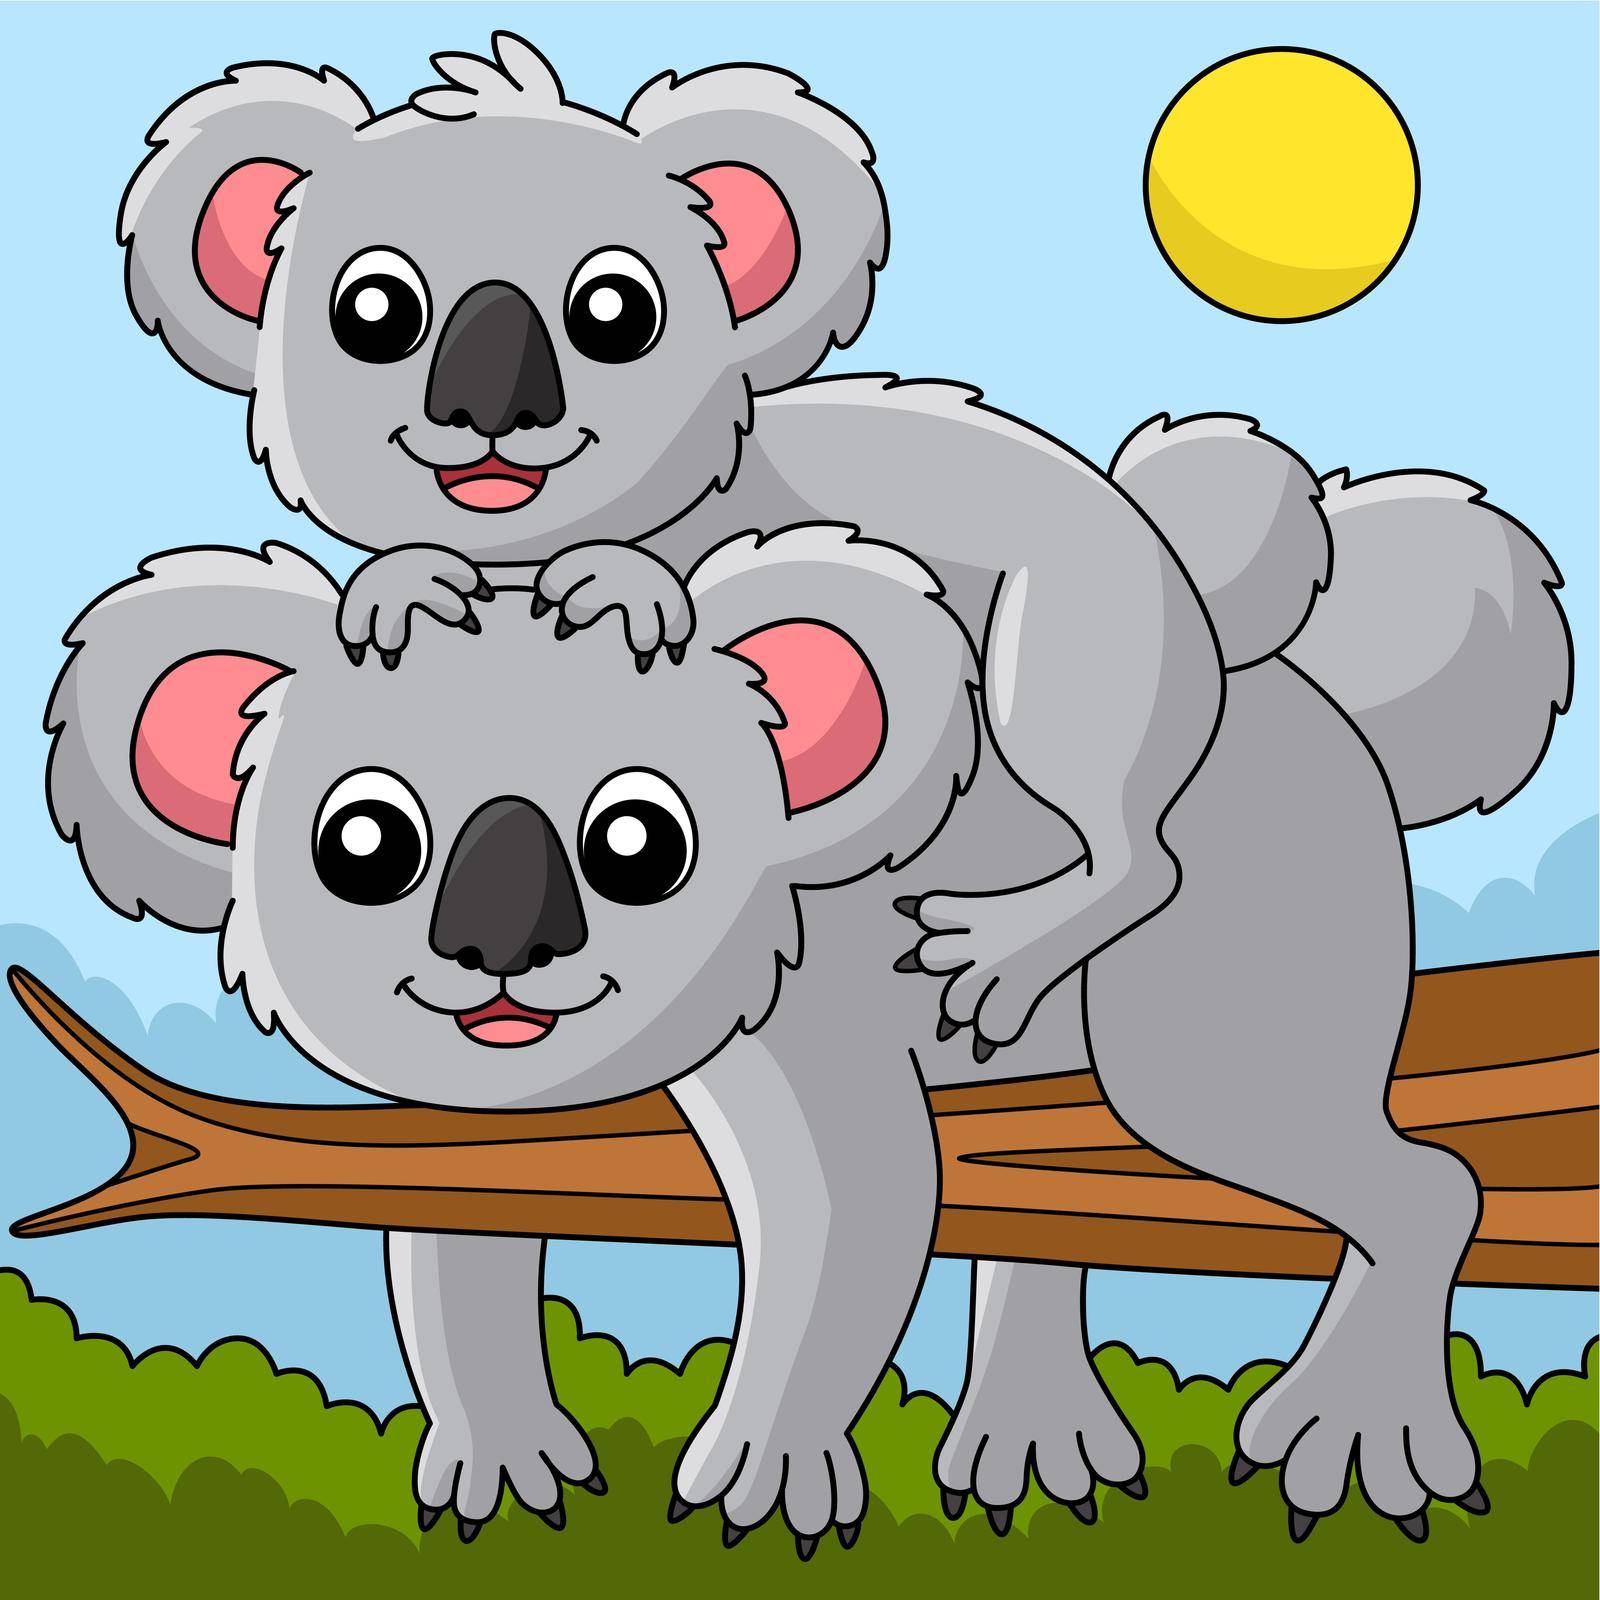 This cartoon illustration shows a koala with a baby illustration.